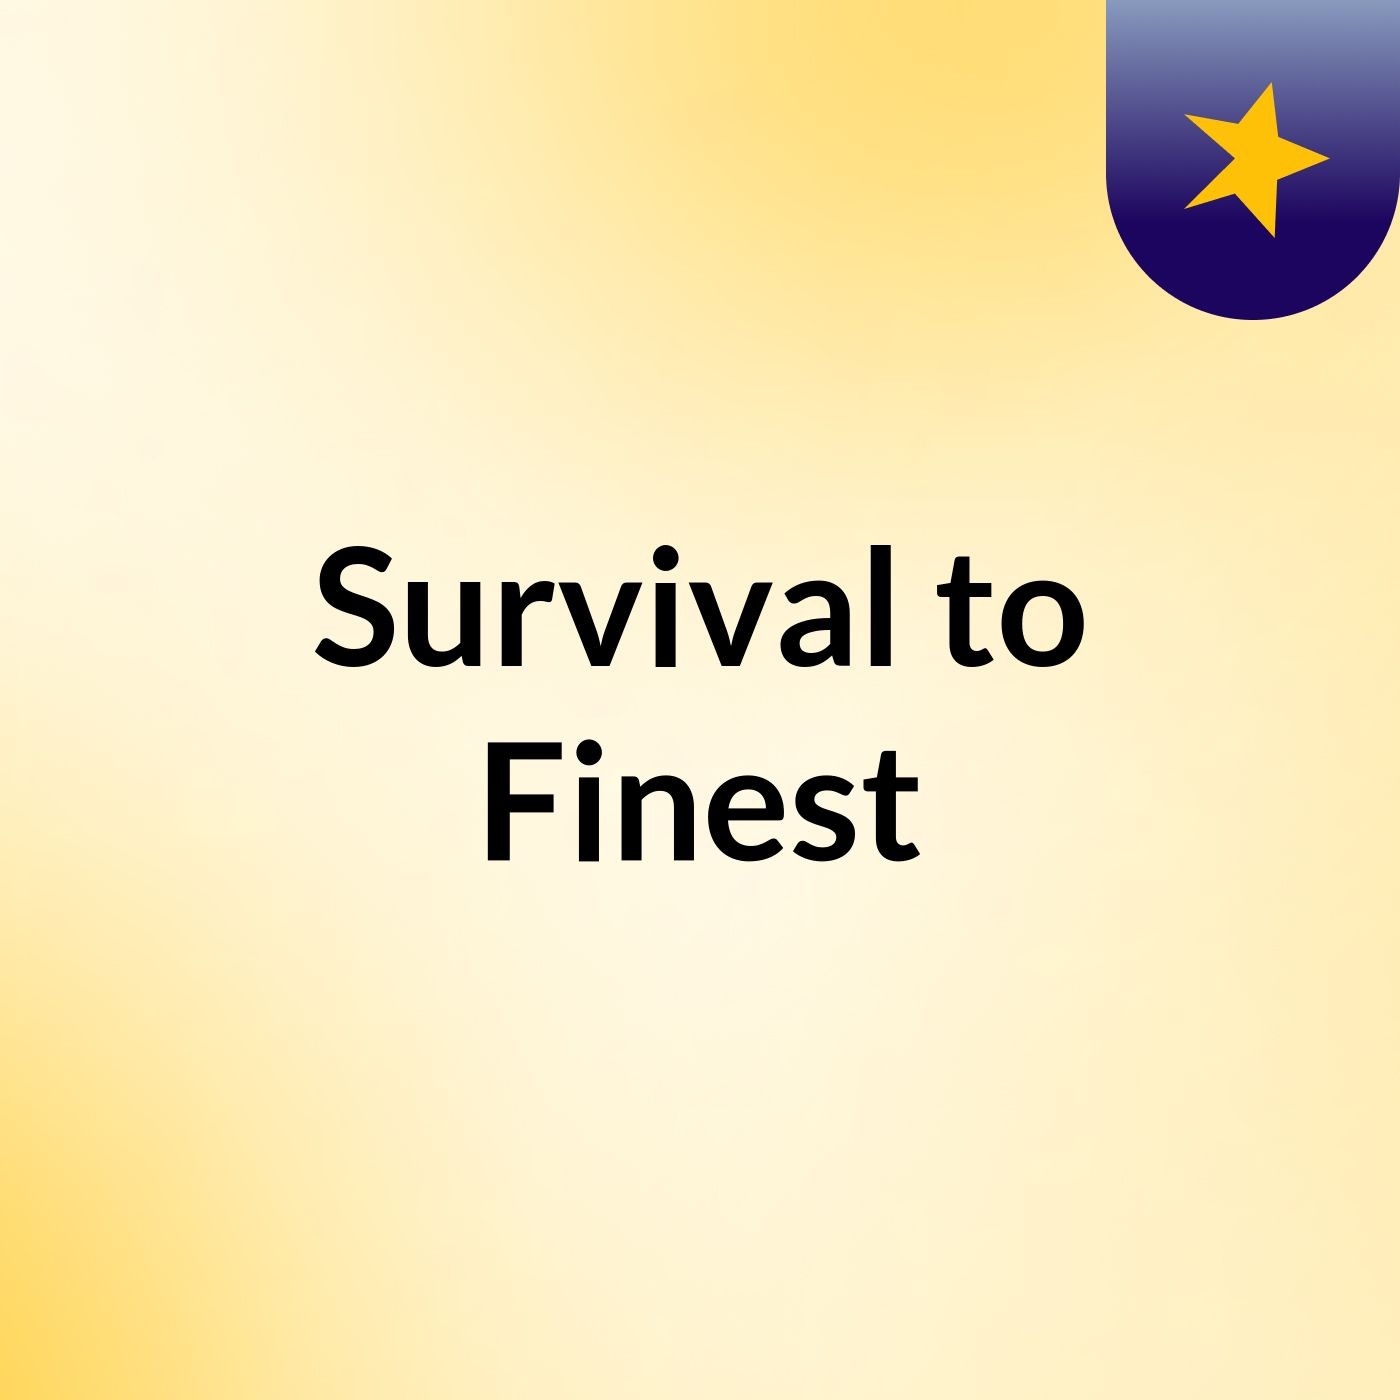 Survival to Finest